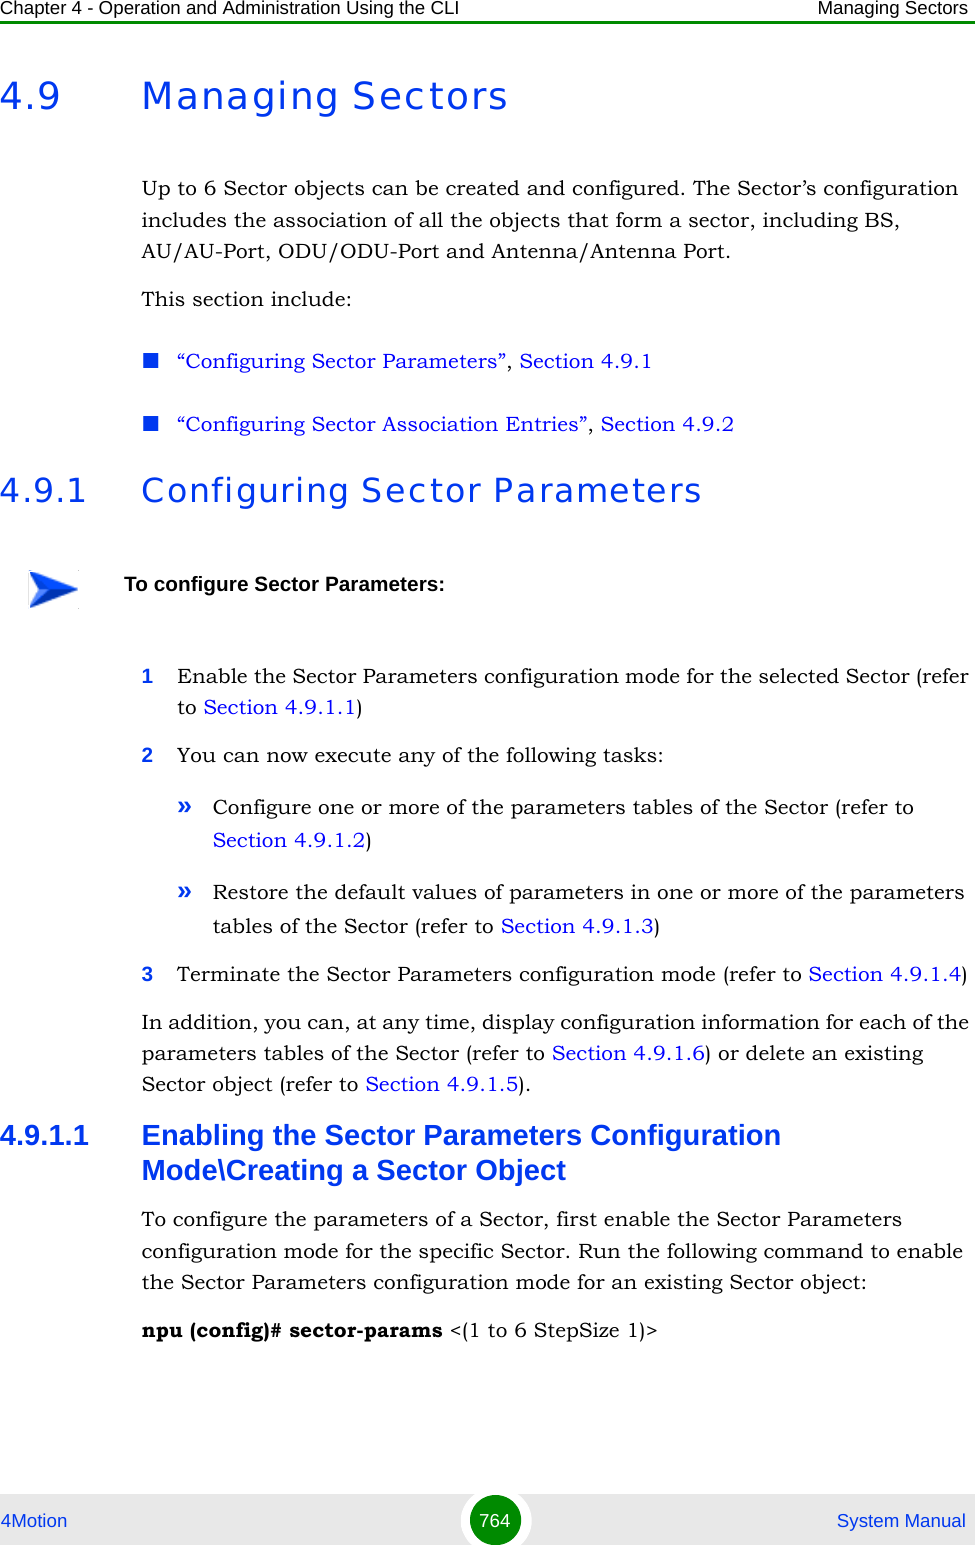 Chapter 4 - Operation and Administration Using the CLI Managing Sectors4Motion 764  System Manual4.9 Managing SectorsUp to 6 Sector objects can be created and configured. The Sector’s configuration includes the association of all the objects that form a sector, including BS, AU/AU-Port, ODU/ODU-Port and Antenna/Antenna Port.This section include:“Configuring Sector Parameters”, Section 4.9.1“Configuring Sector Association Entries”, Section 4.9.24.9.1 Configuring Sector Parameters1Enable the Sector Parameters configuration mode for the selected Sector (refer to Section 4.9.1.1)2You can now execute any of the following tasks:»Configure one or more of the parameters tables of the Sector (refer to Section 4.9.1.2)»Restore the default values of parameters in one or more of the parameters tables of the Sector (refer to Section 4.9.1.3)3Terminate the Sector Parameters configuration mode (refer to Section 4.9.1.4)In addition, you can, at any time, display configuration information for each of the parameters tables of the Sector (refer to Section 4.9.1.6) or delete an existing Sector object (refer to Section 4.9.1.5). 4.9.1.1 Enabling the Sector Parameters Configuration Mode\Creating a Sector ObjectTo configure the parameters of a Sector, first enable the Sector Parameters configuration mode for the specific Sector. Run the following command to enable the Sector Parameters configuration mode for an existing Sector object:npu (config)# sector-params &lt;(1 to 6 StepSize 1)&gt; To configure Sector Parameters: